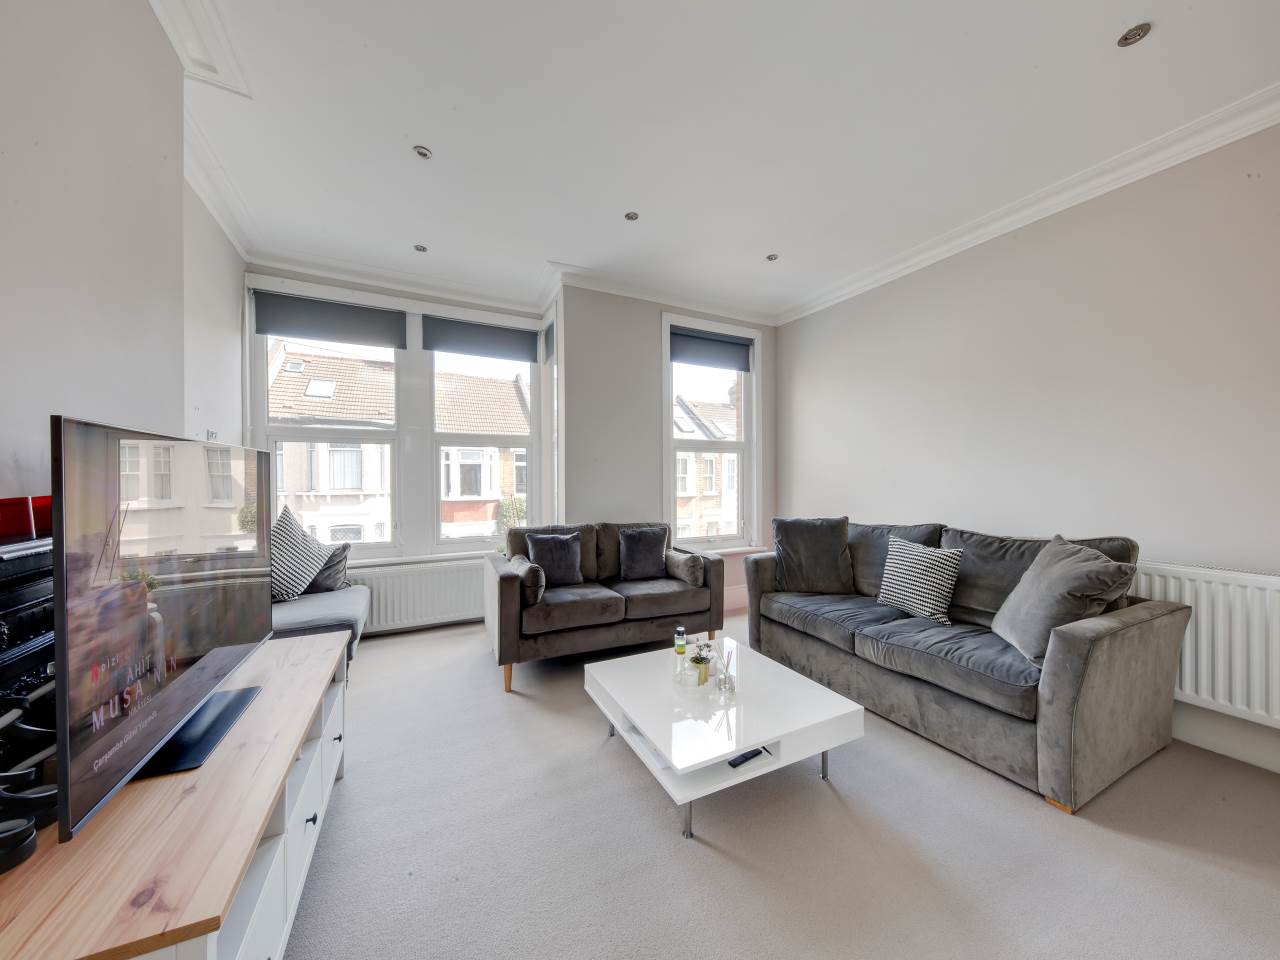 1 bed flat for sale in Connaught Road, Chingford - Property Image 1